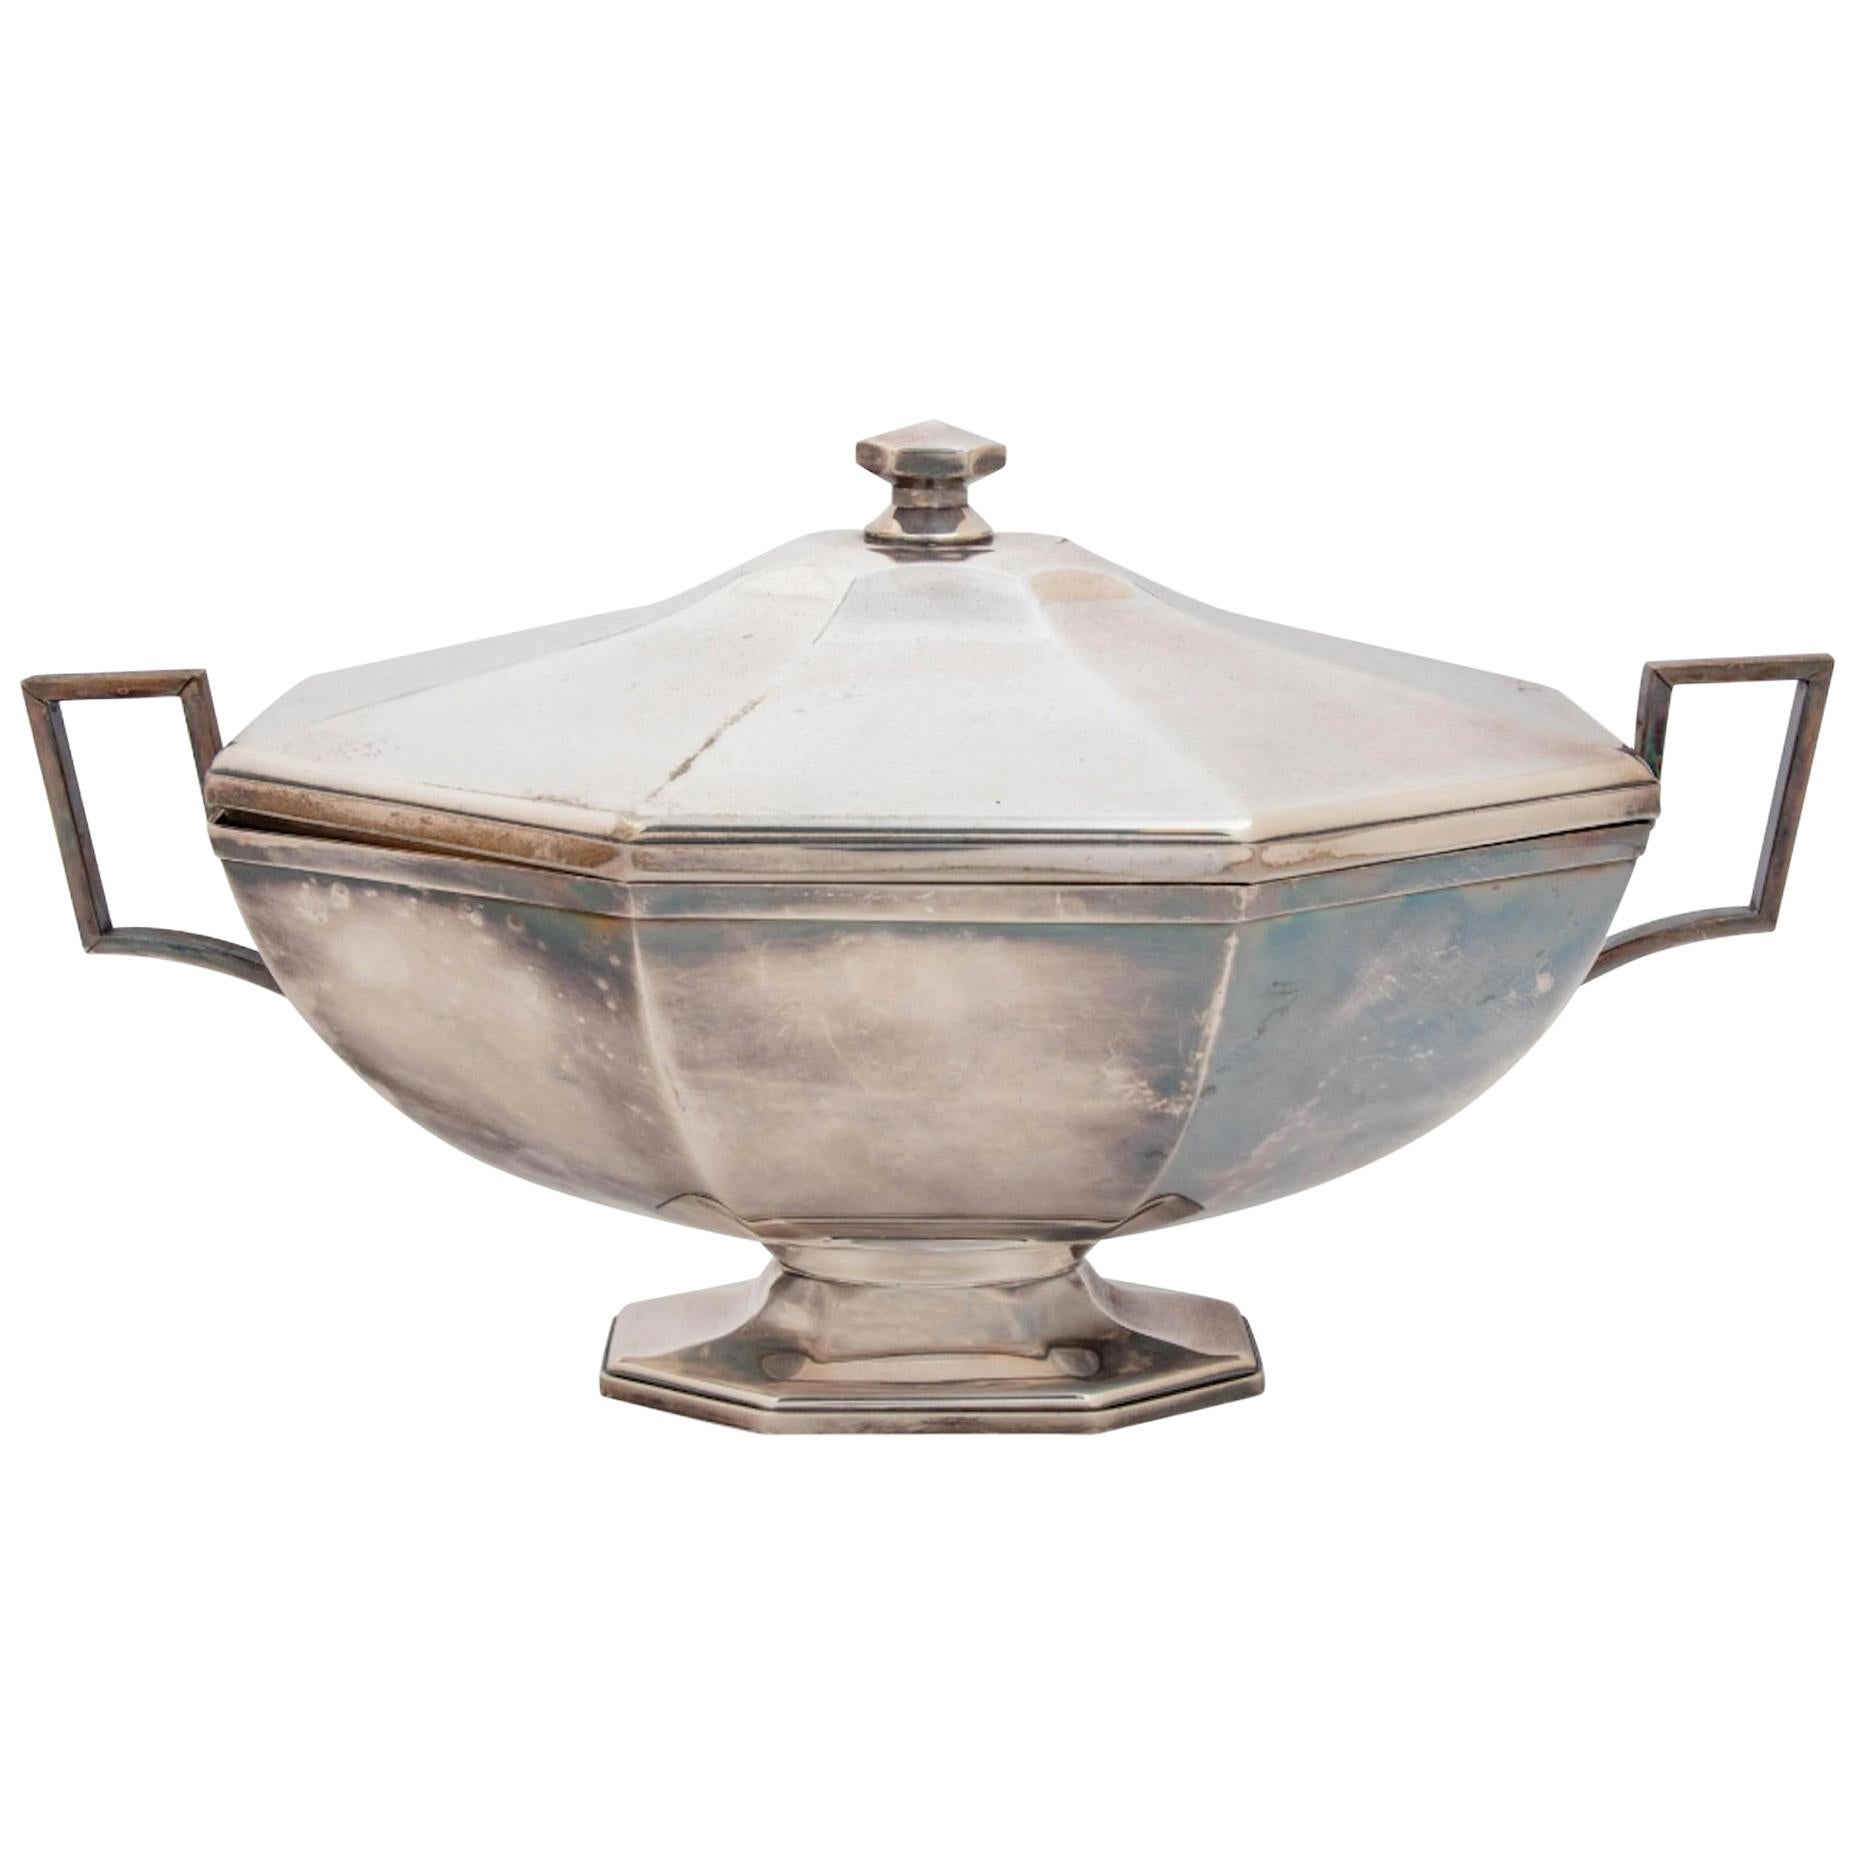 Silver Plate Tureen, Great Scale, Form and Simplicity, a Deffinate Statement